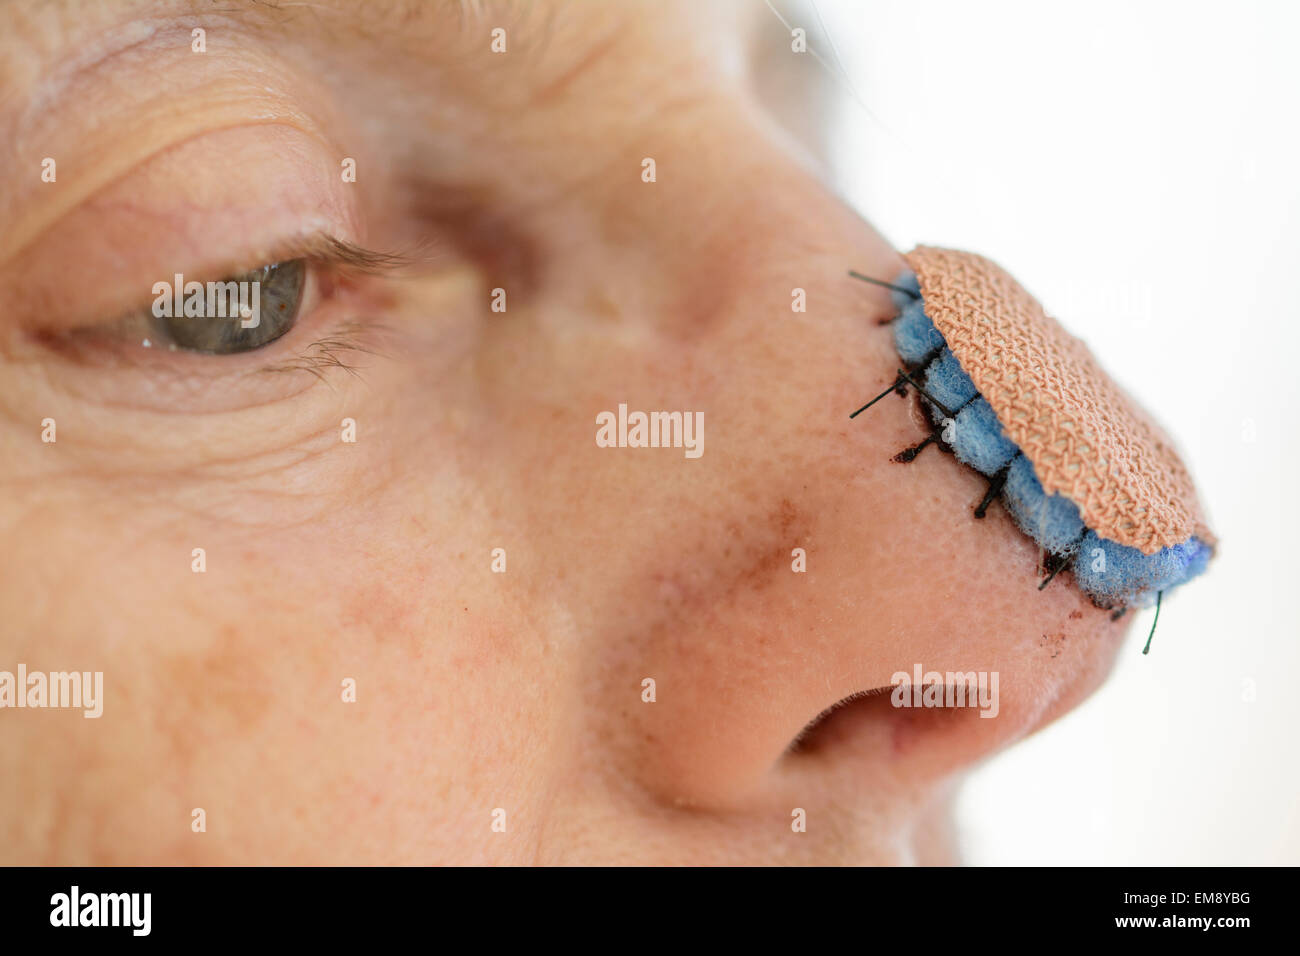 Dressing on a woman's nose after a skin graft. Stitches after nose surgery Stock Photo